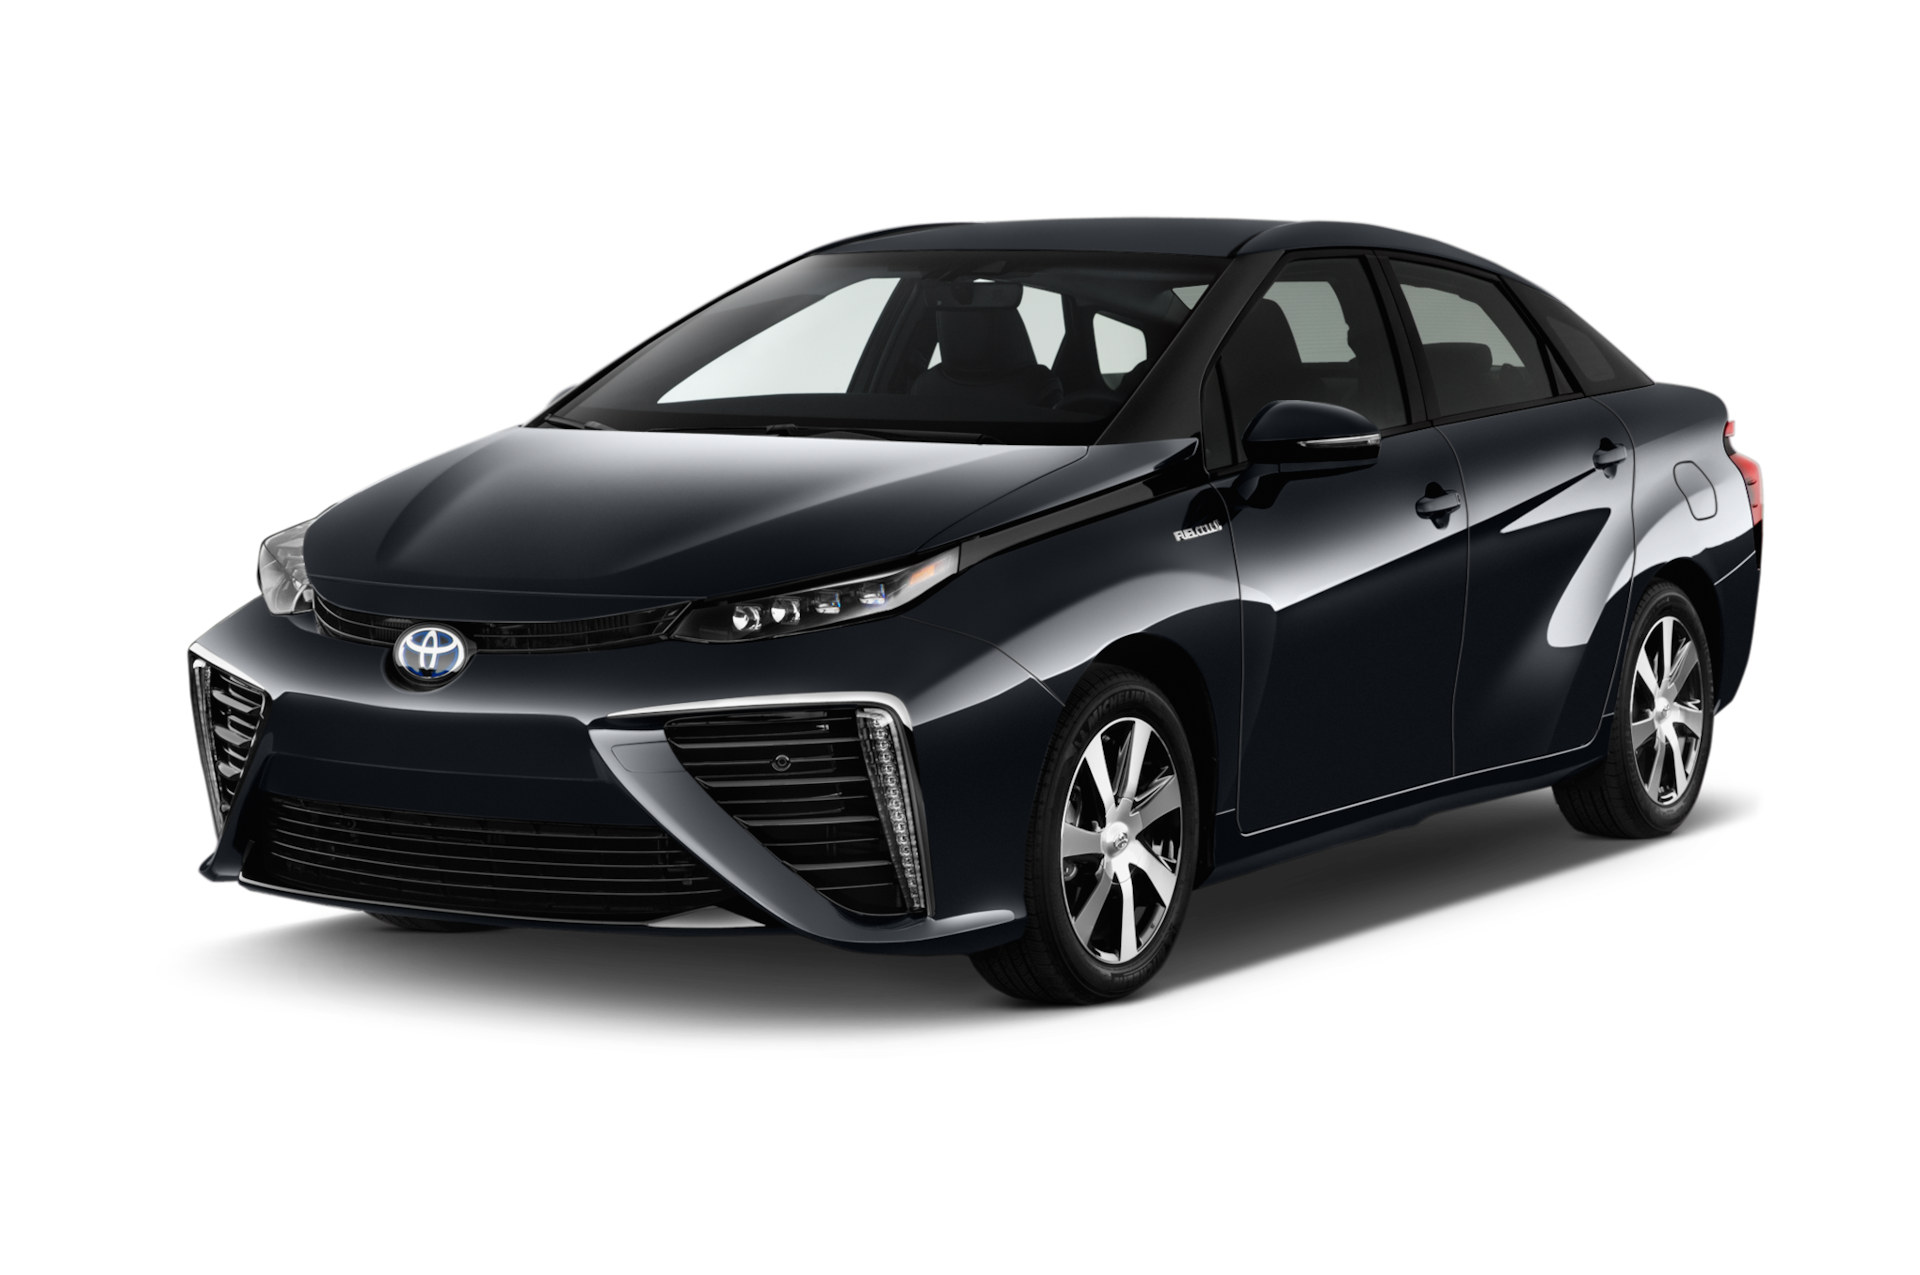 2016 Toyota Mirai Prices, Reviews, and Photos - MotorTrend